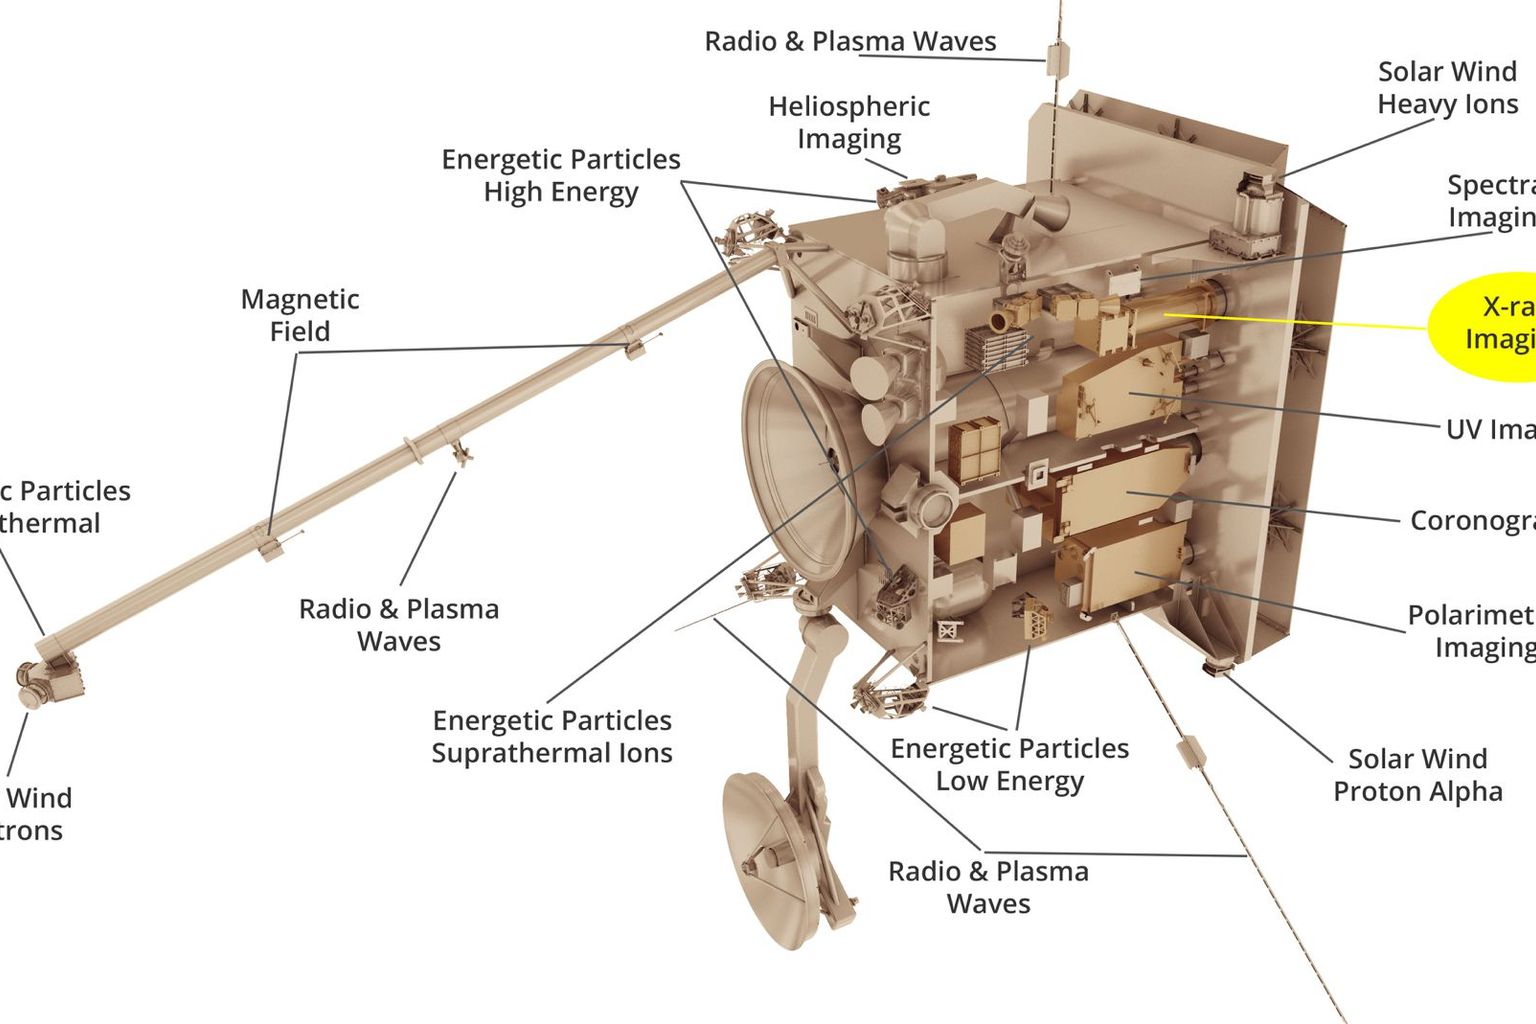 The Solar Orbiter, which was developed by the European Space Agency (ESA) together with its US partner organisation NASA, accommodates ten experiments, one of which is the STIX X-ray telescope.